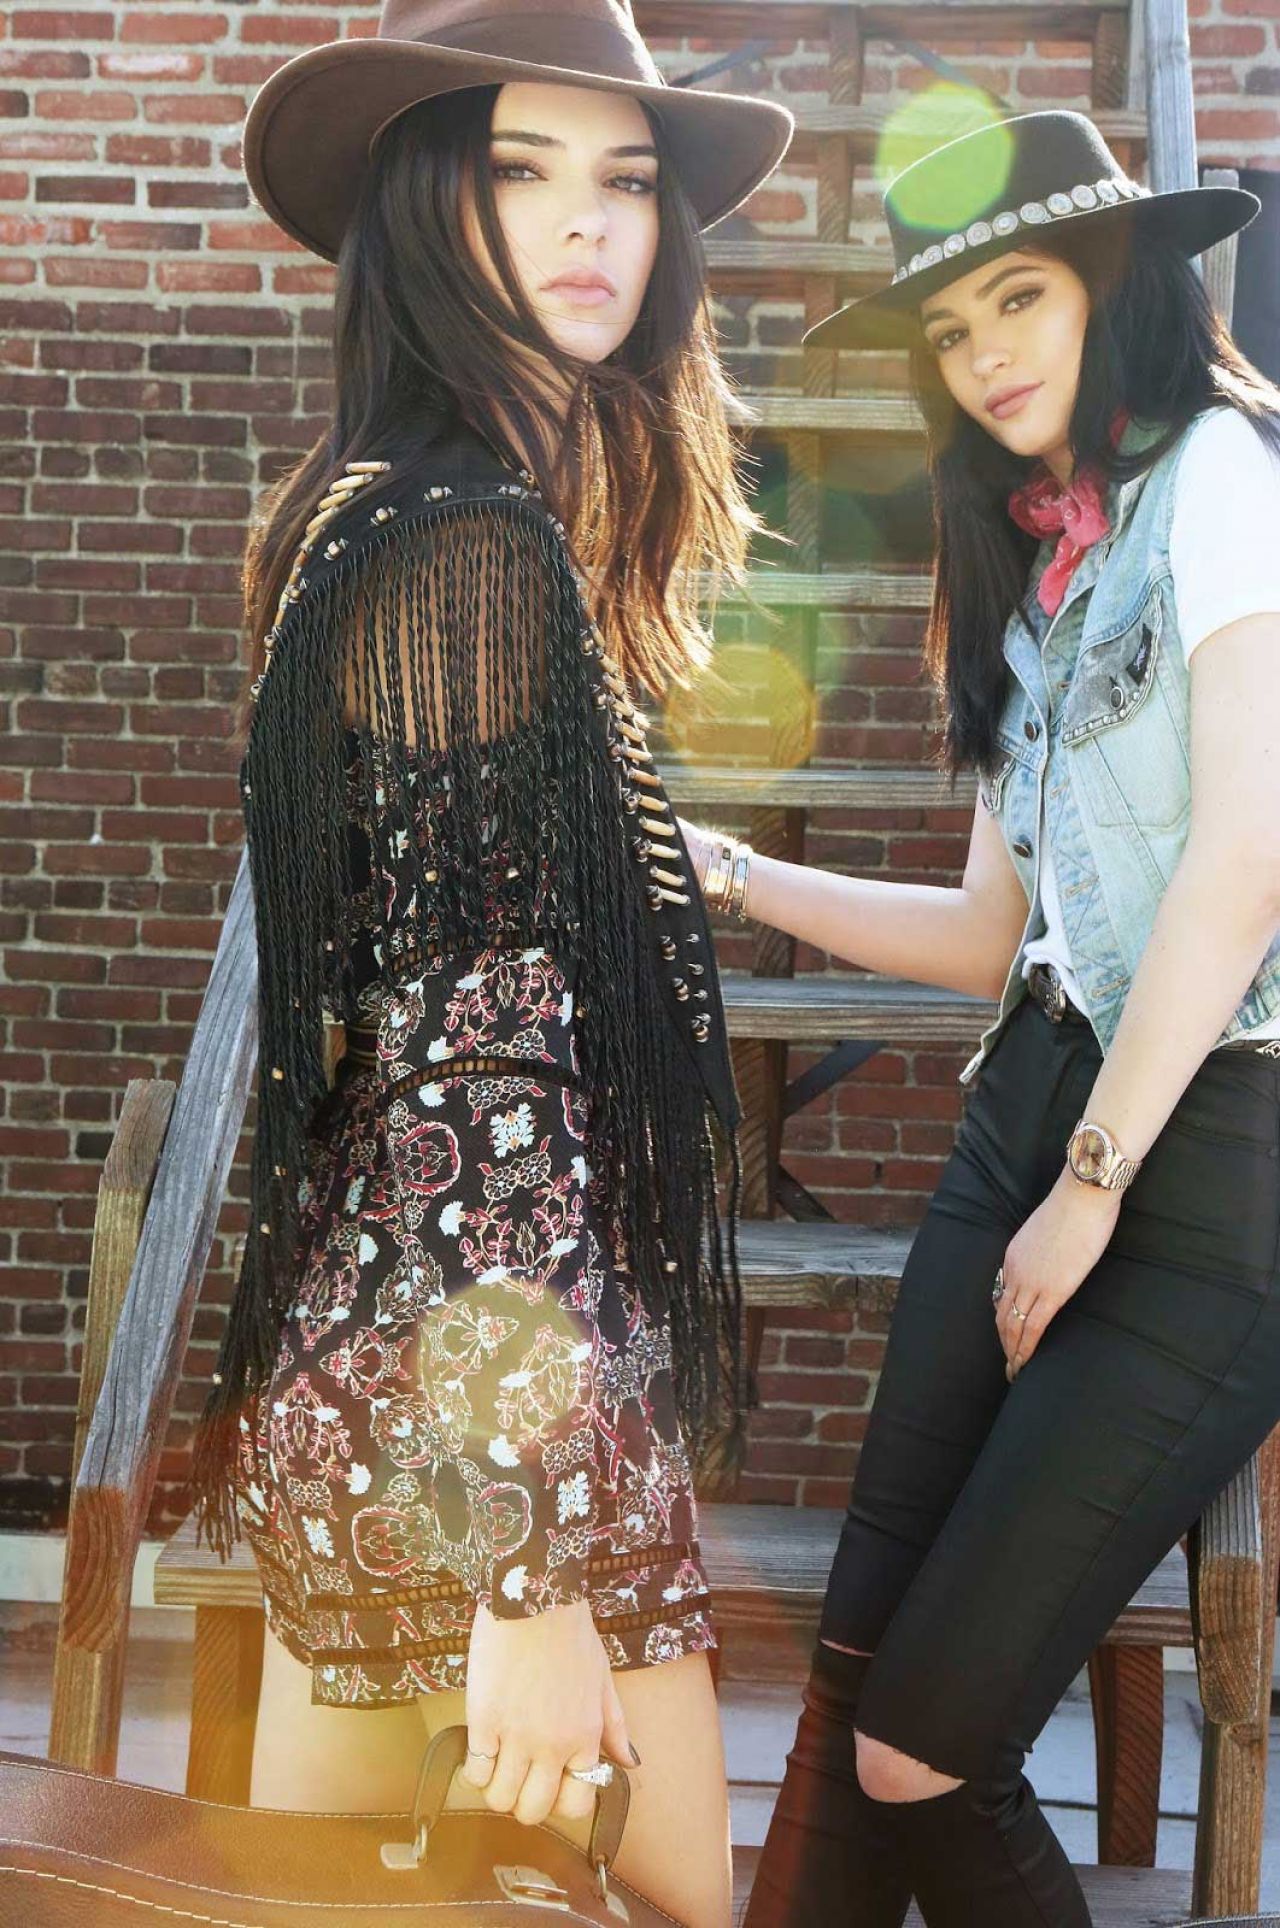 Kendall & Kylie Jenner – PacSun ‘Las Rebeldes’ Fall 2015 (more images ...